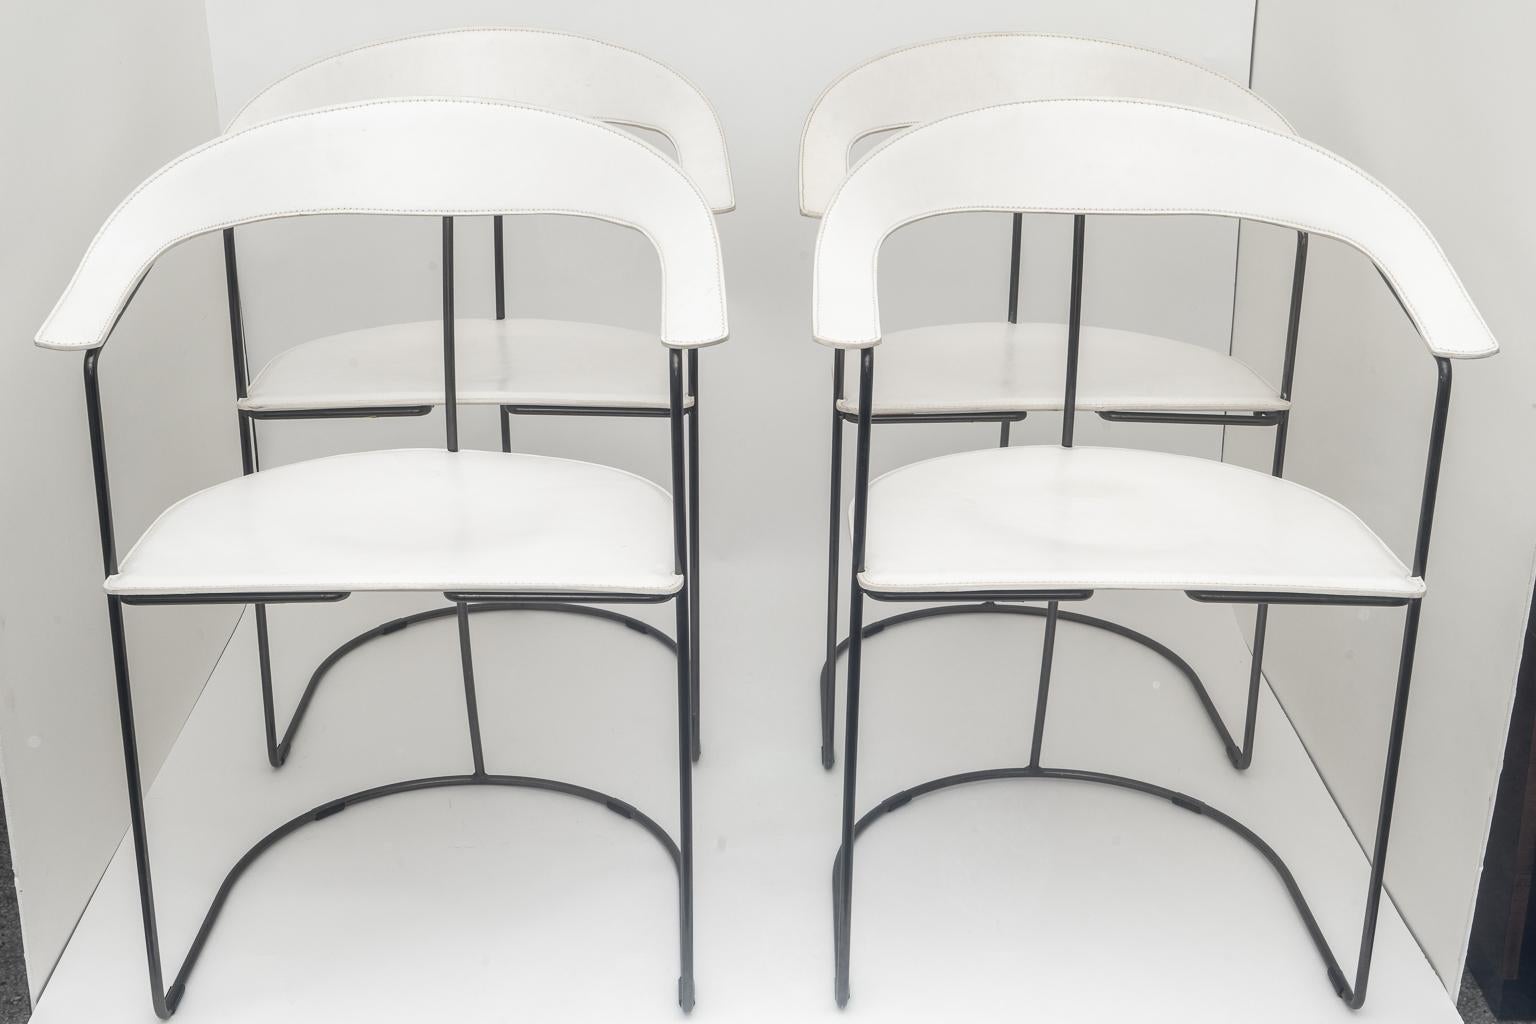 These four slope-backed armchairs in white leather were created by Arrben in the 1980s-1990s. The chairs are very simple in design and have a great sculptural presence. 

Note: The tubular frames are solid and in a polished gun-metal finish.